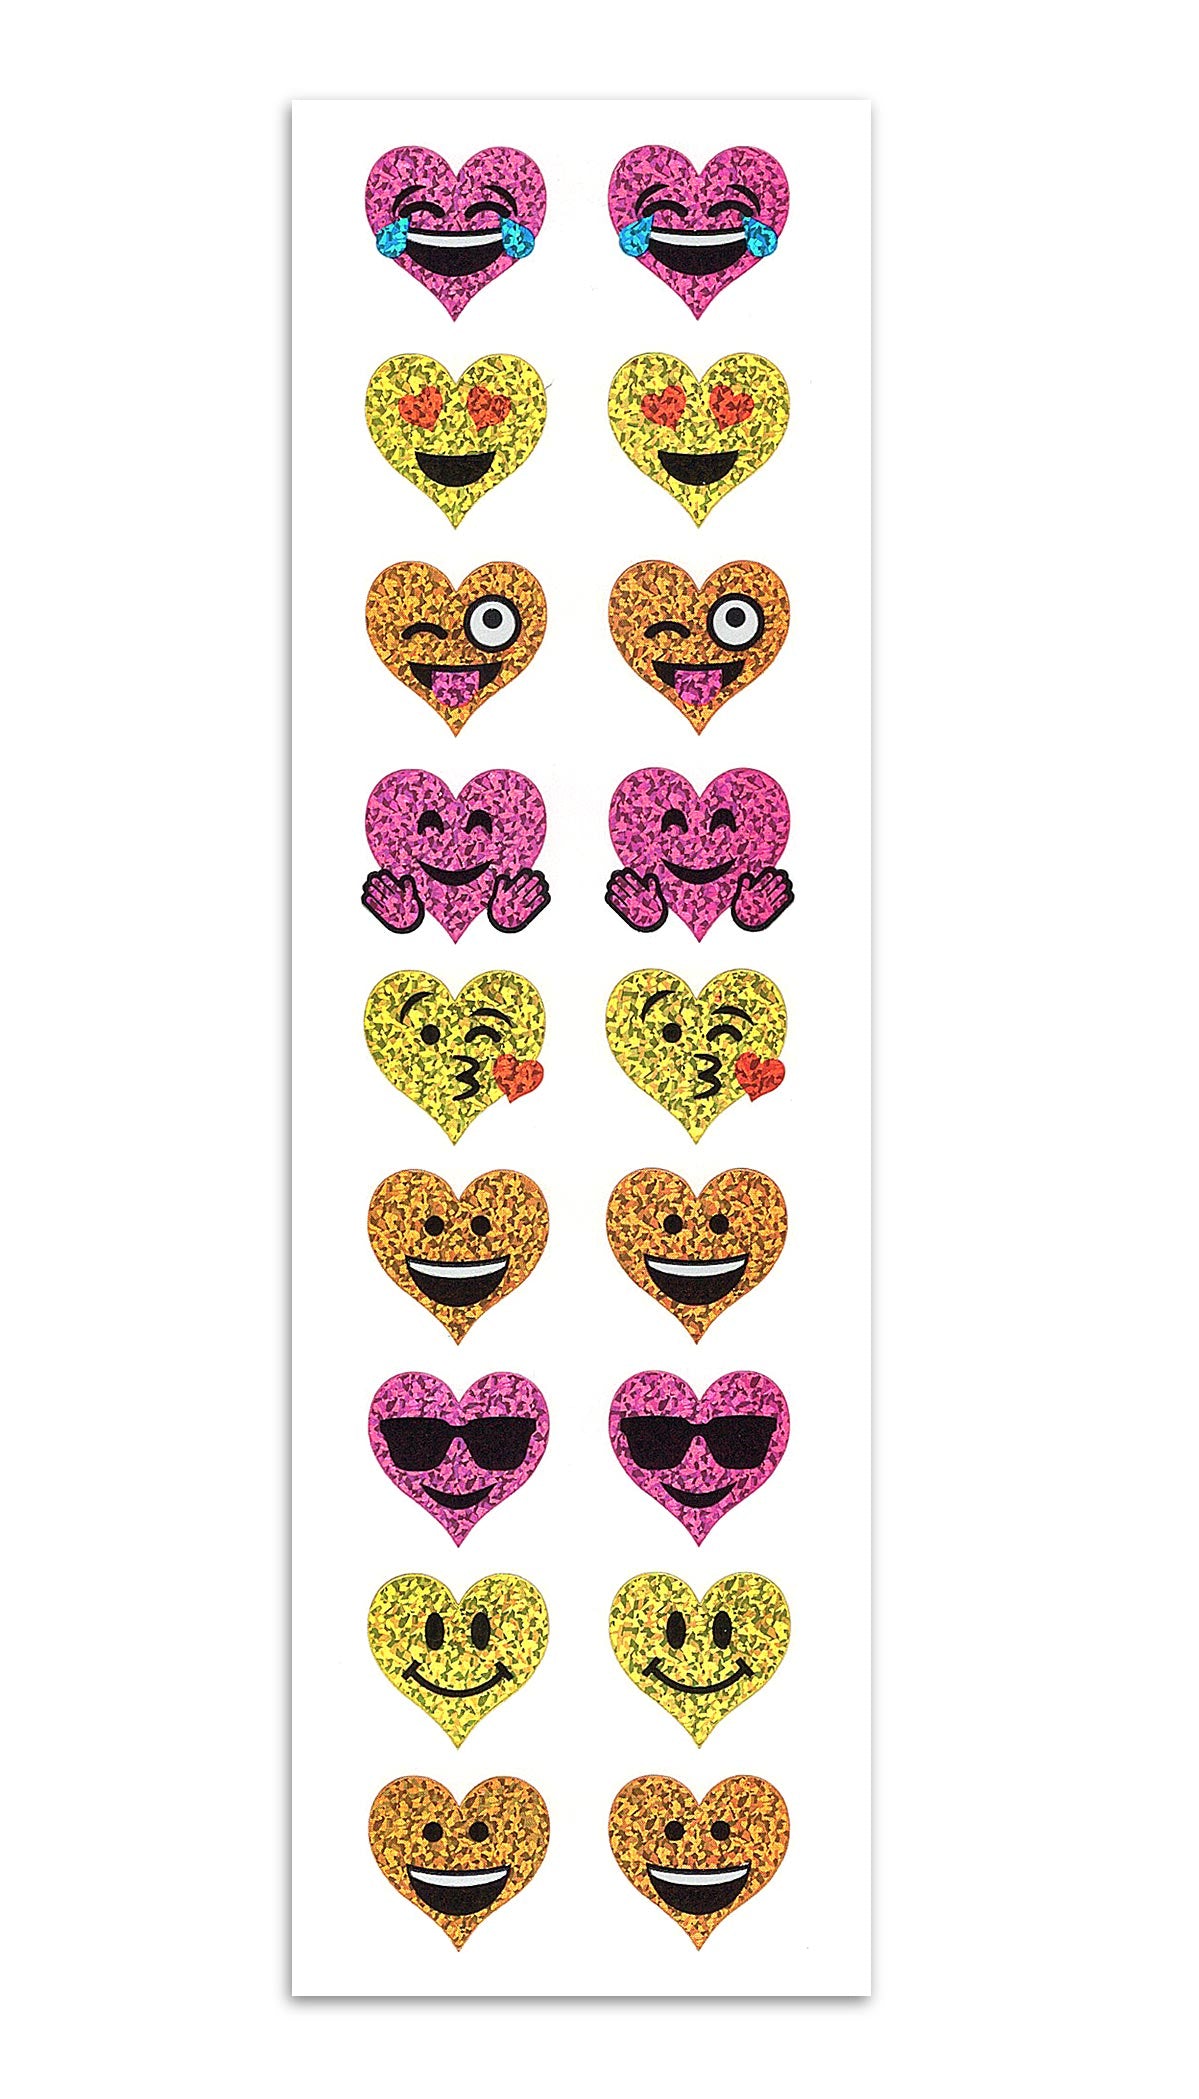 Hearts Tagged large heart stickers - Mrs. Grossman's